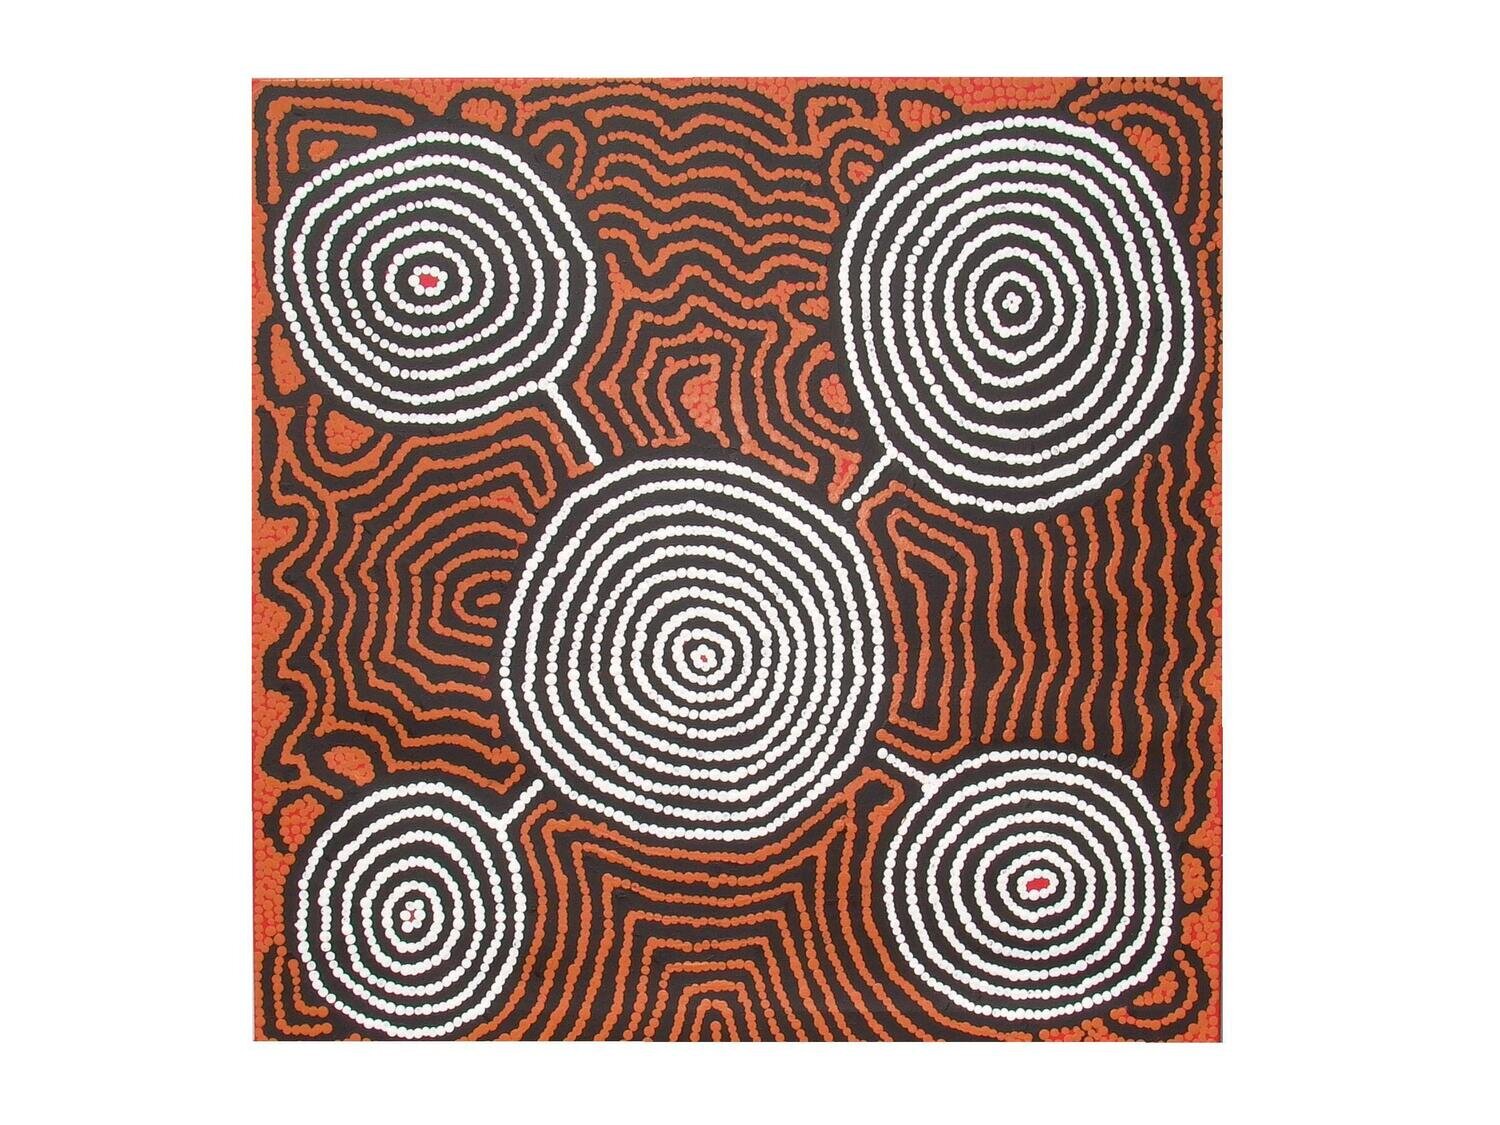 Tingari Cycle, 2005 by Barney Campbell Tjakamarra
91x91cm Cat 9242BC